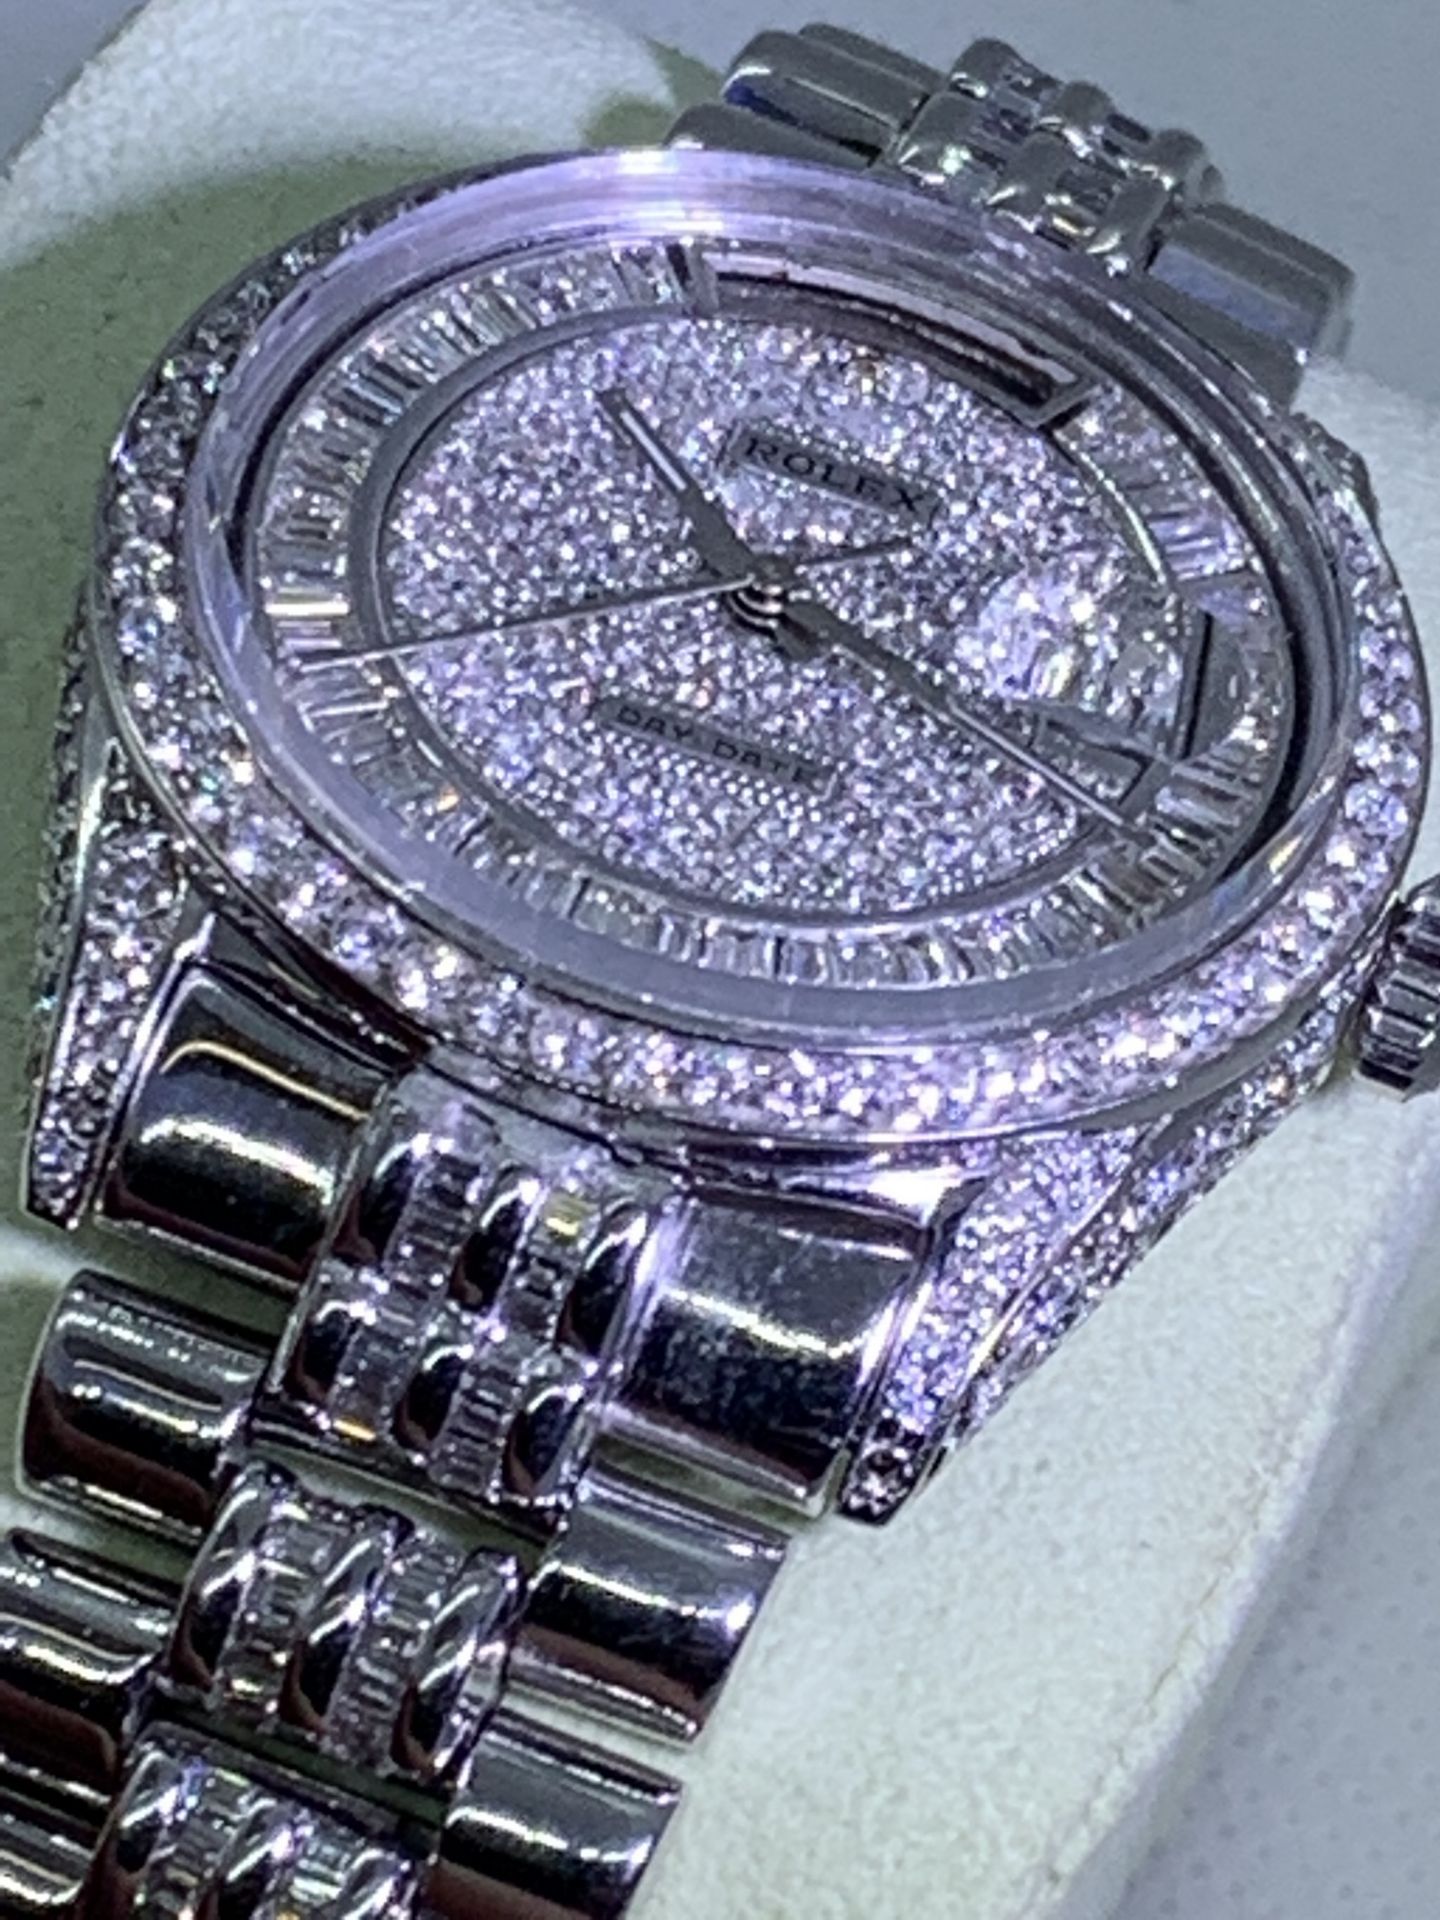 Diamond Encrusted Mens 36mm Day-Date, Solid White Gold - Diamond/ “Super President” Marked ROLEX - Image 17 of 18